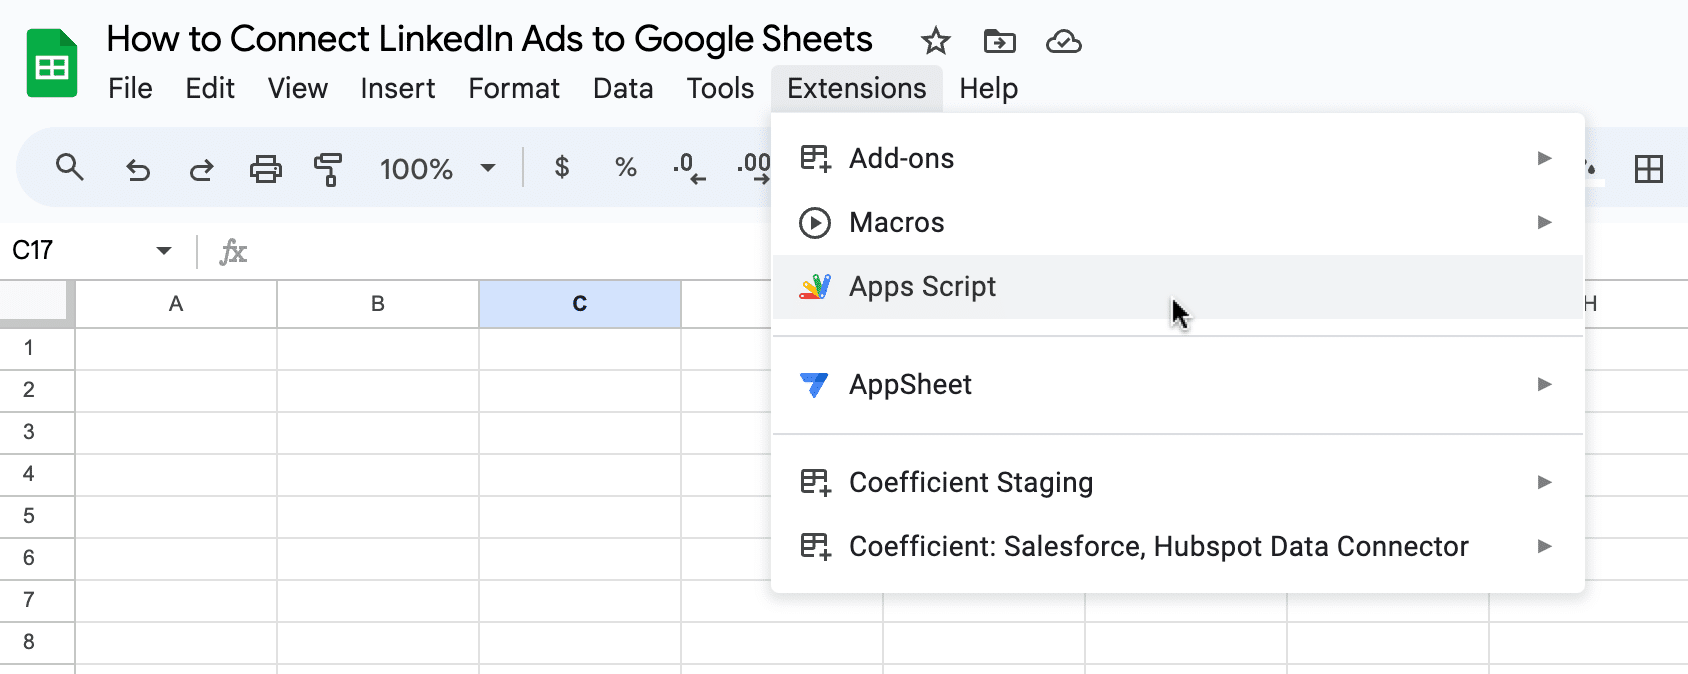 Those who prefer to code can connect LinkedIn Ads to Google Sheets using Google Apps Script.